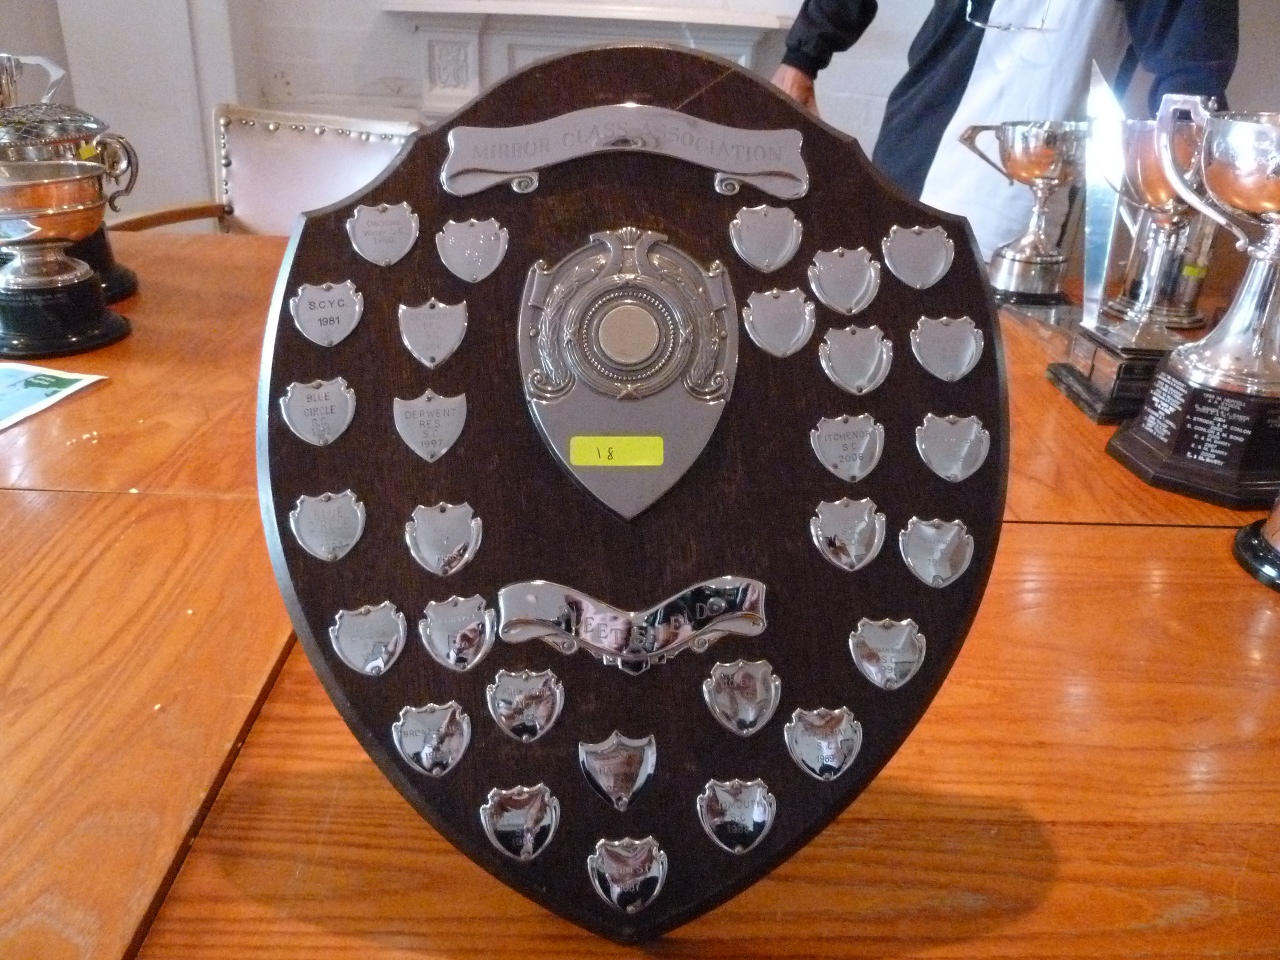 A wooden shield with small engraved shields mounted on it